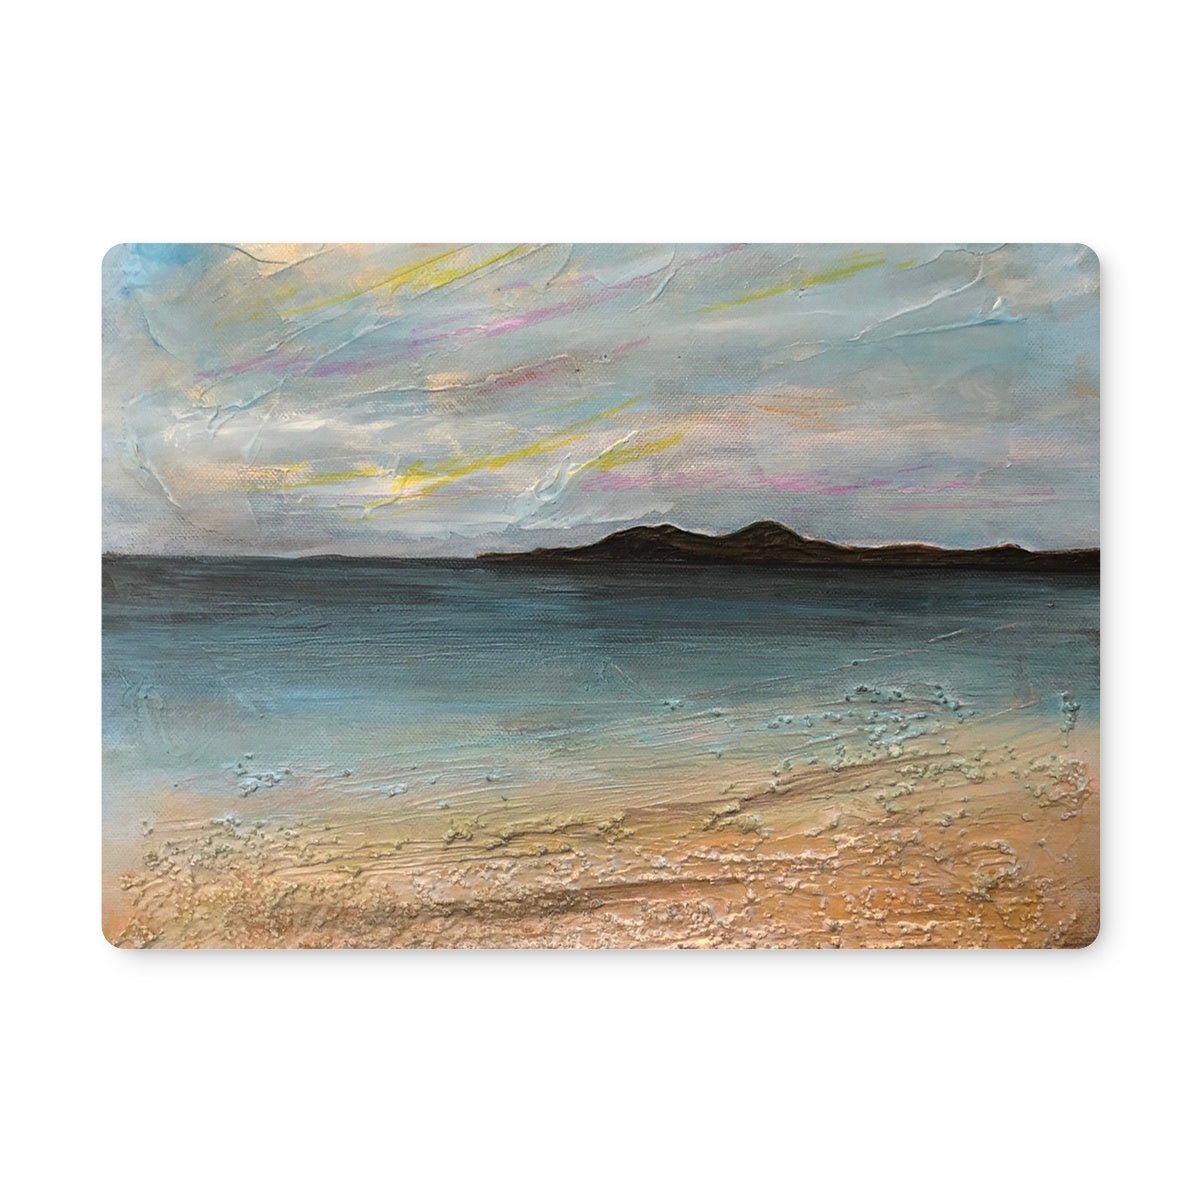 Garrynamonie Beach South Uist Art Gifts Placemat-Placemats-Hebridean Islands Art Gallery-6 Placemats-Paintings, Prints, Homeware, Art Gifts From Scotland By Scottish Artist Kevin Hunter